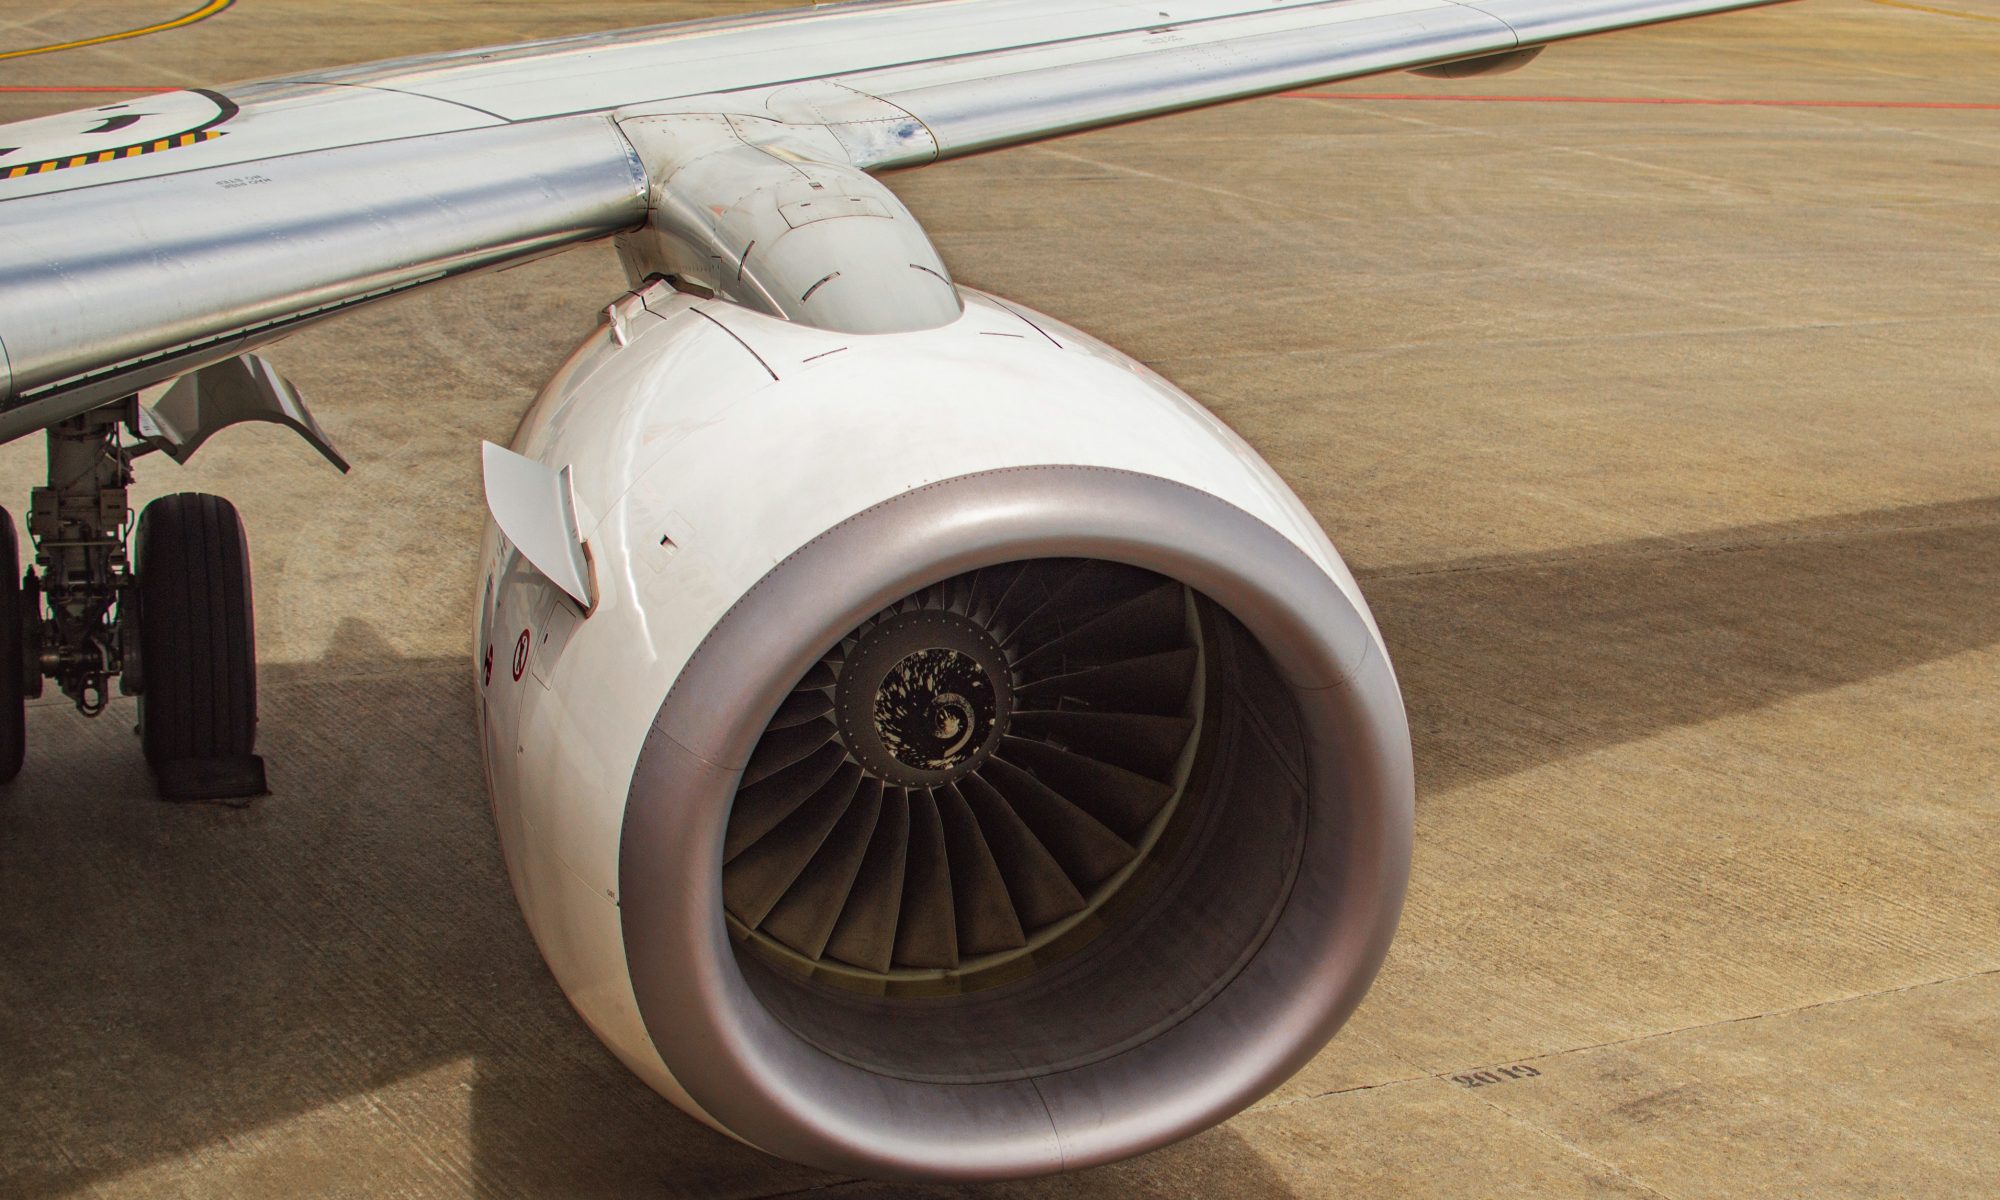 Birds eye view of white left jet engine on a plane